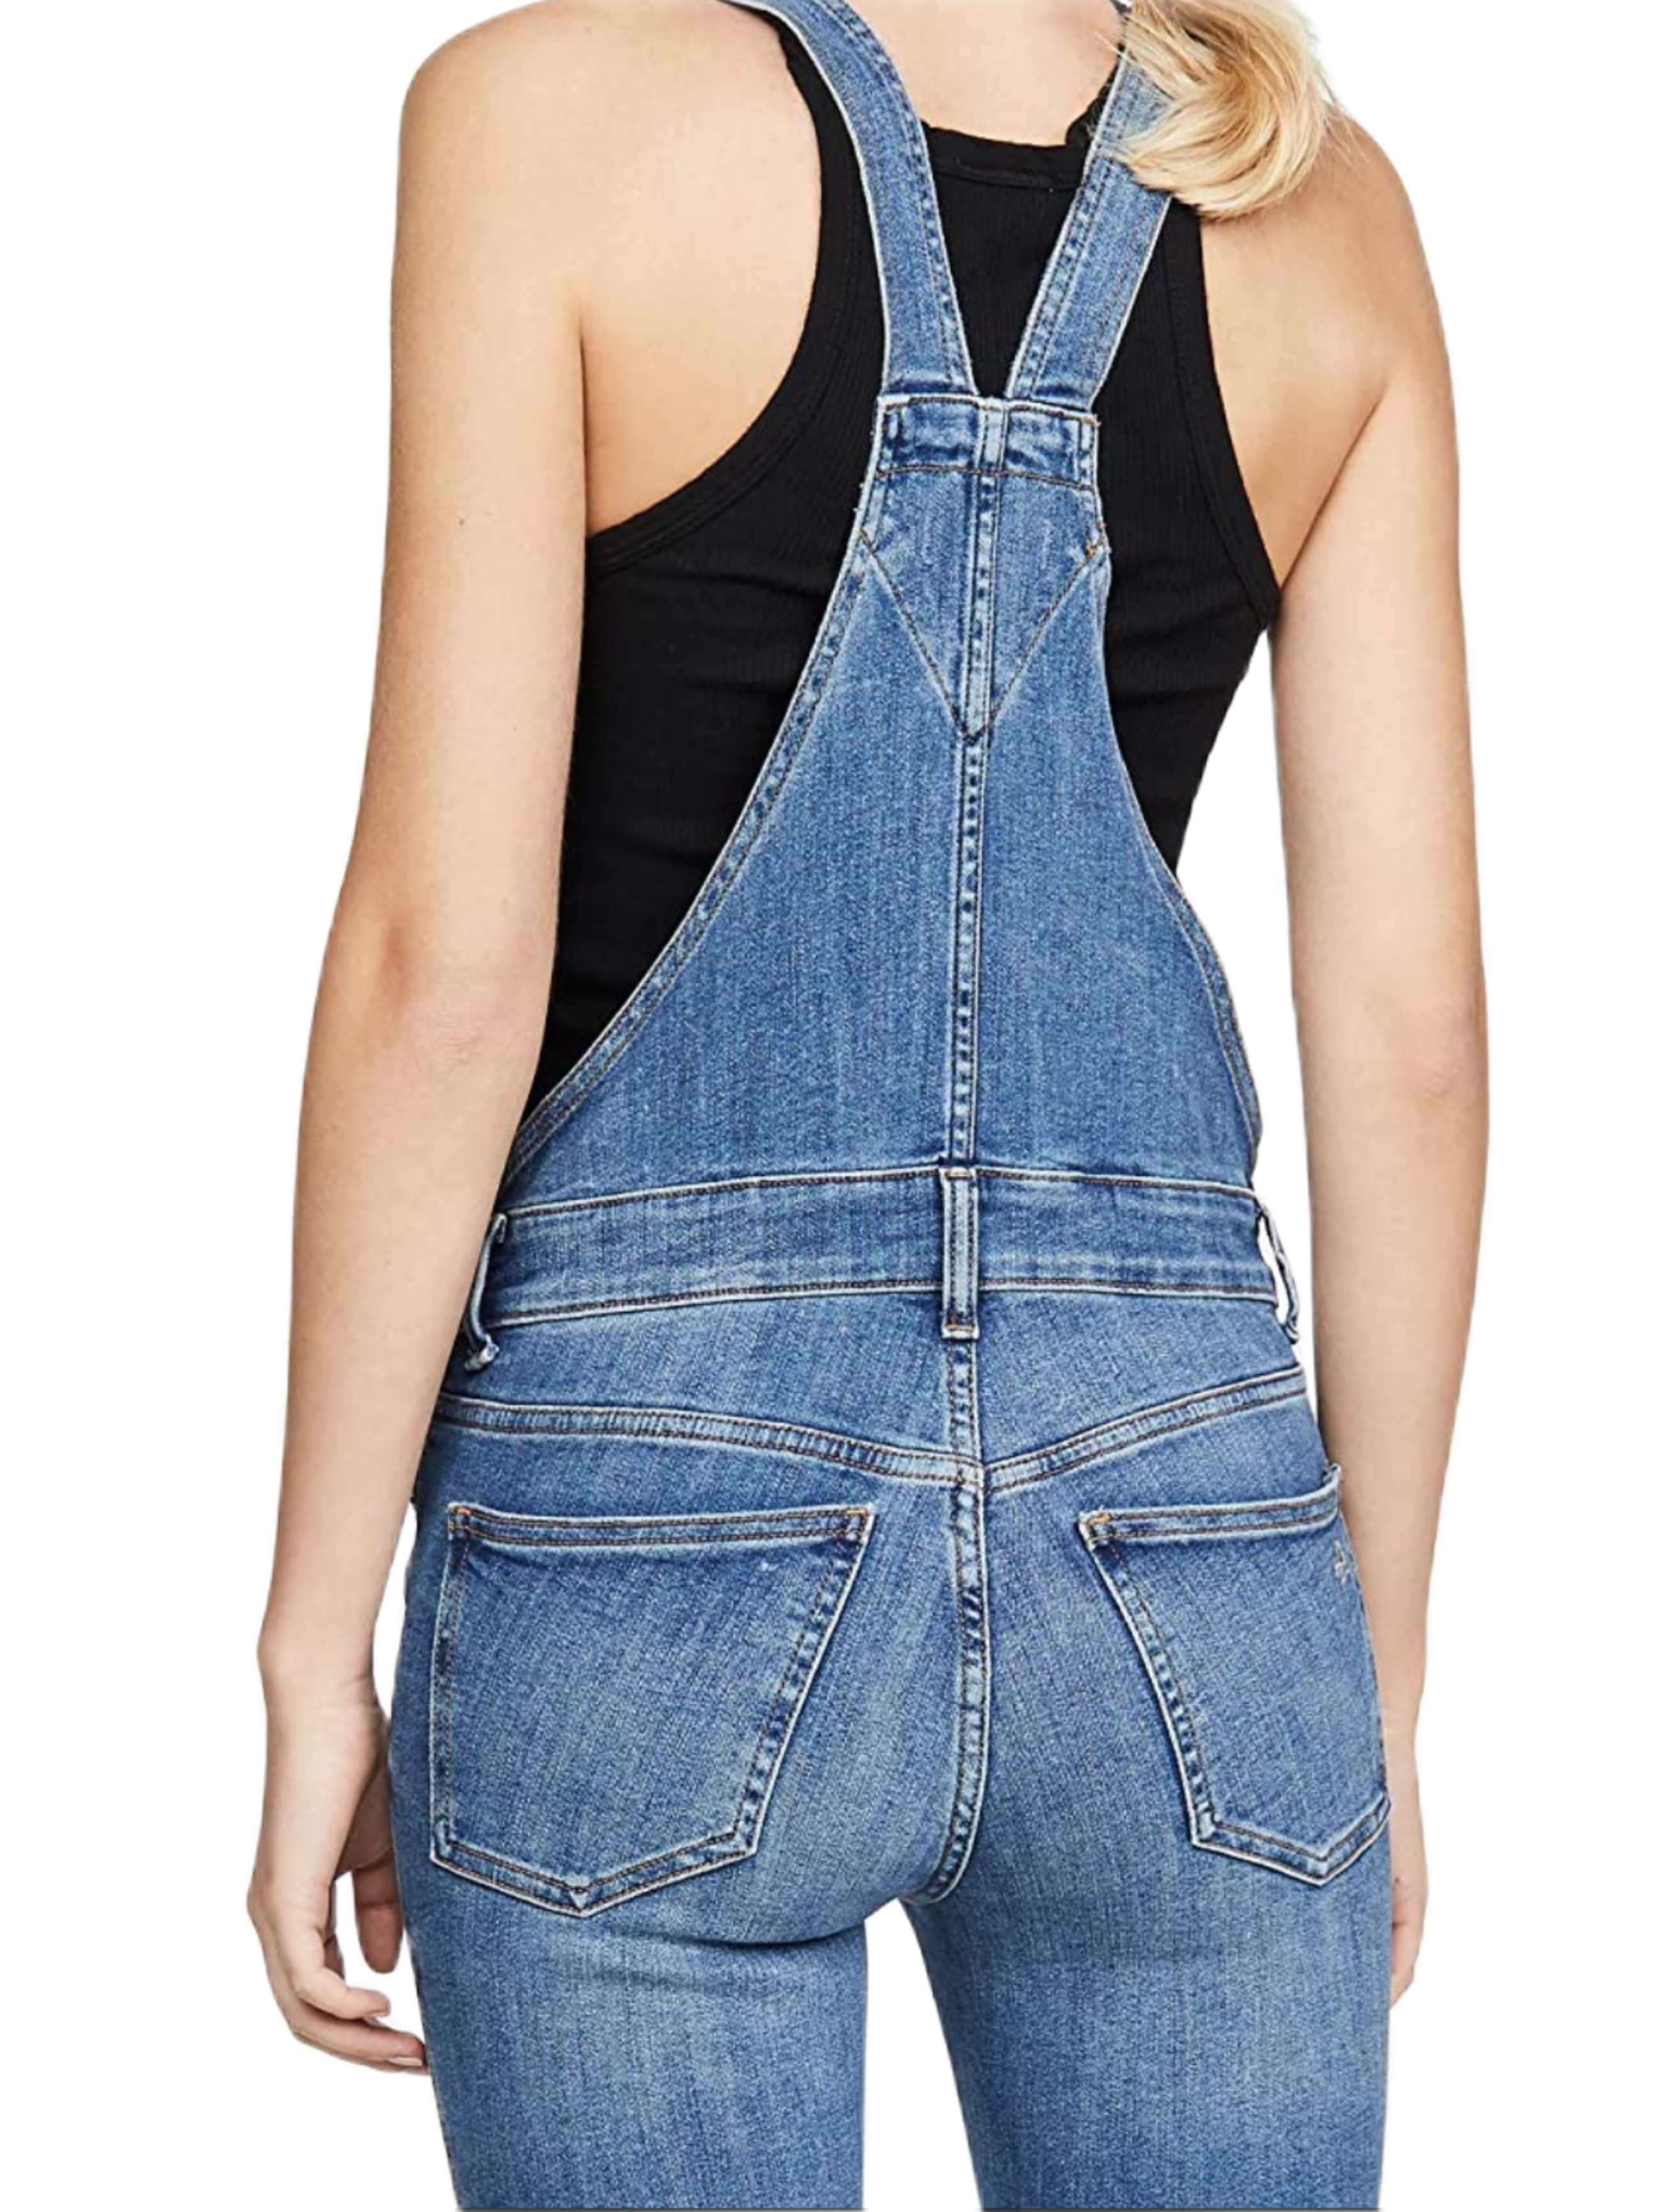 DL1961 Women's Barrow Florence Denim Overall Size 31 NWT